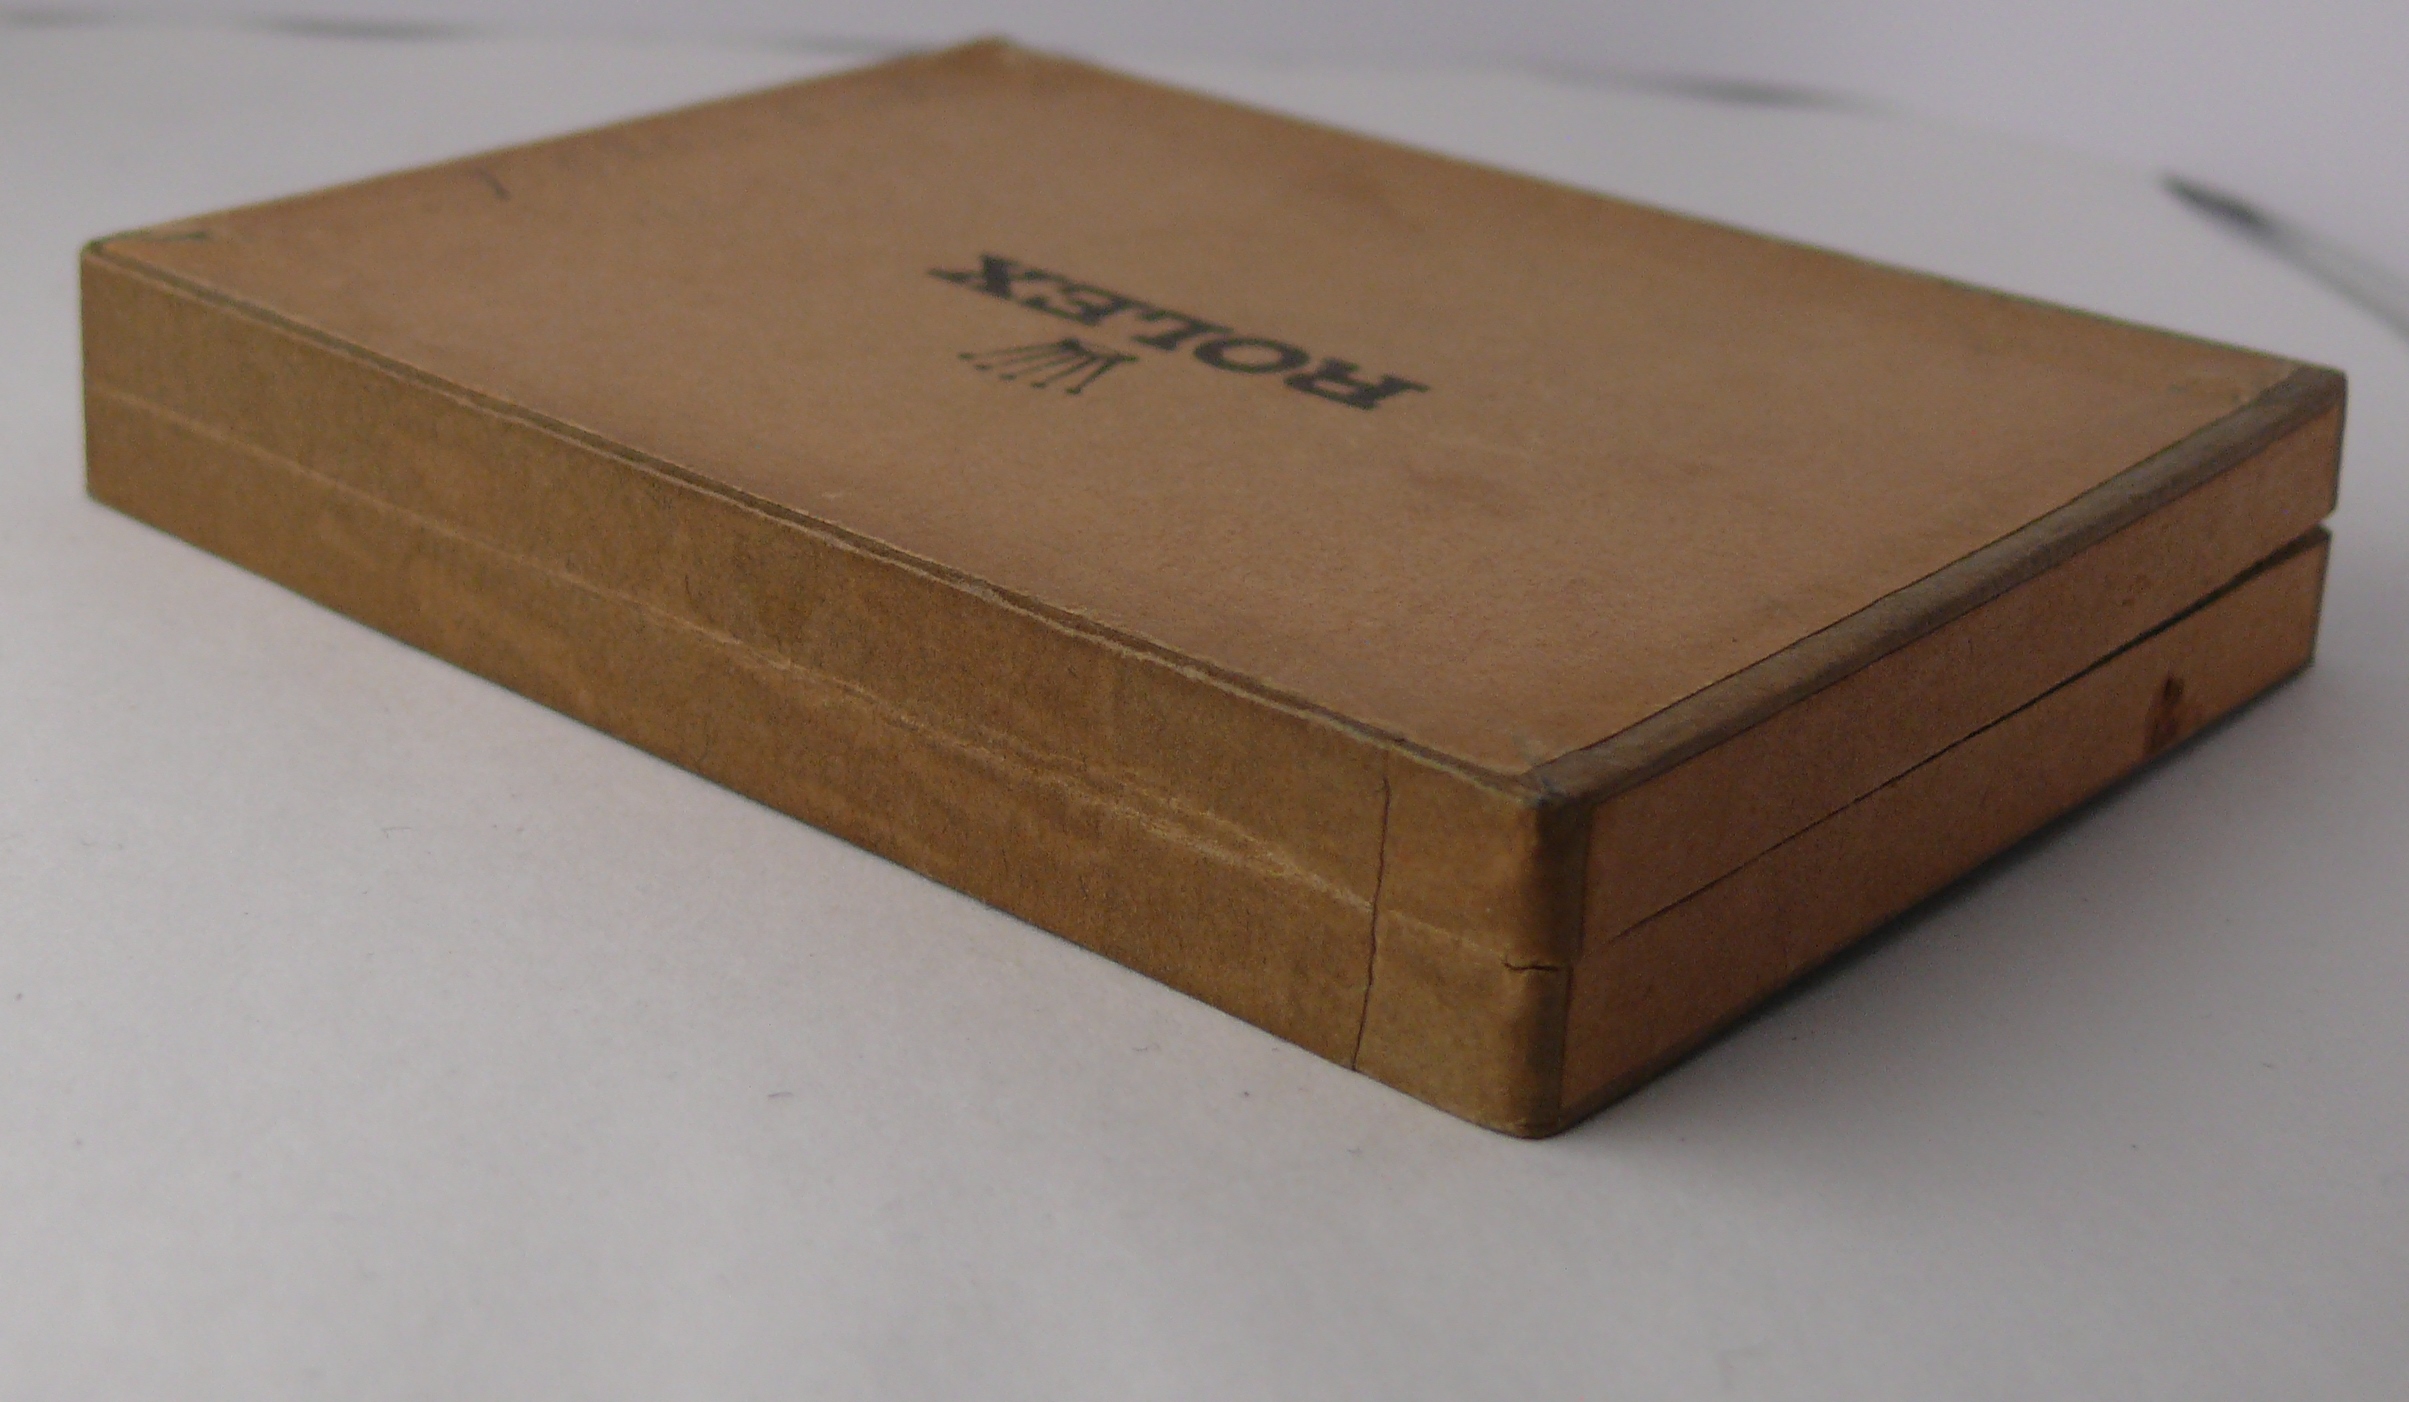 EARLY Vintage Rolex Parts Box. Please note this box is in clean and fair condition. - Image 4 of 6